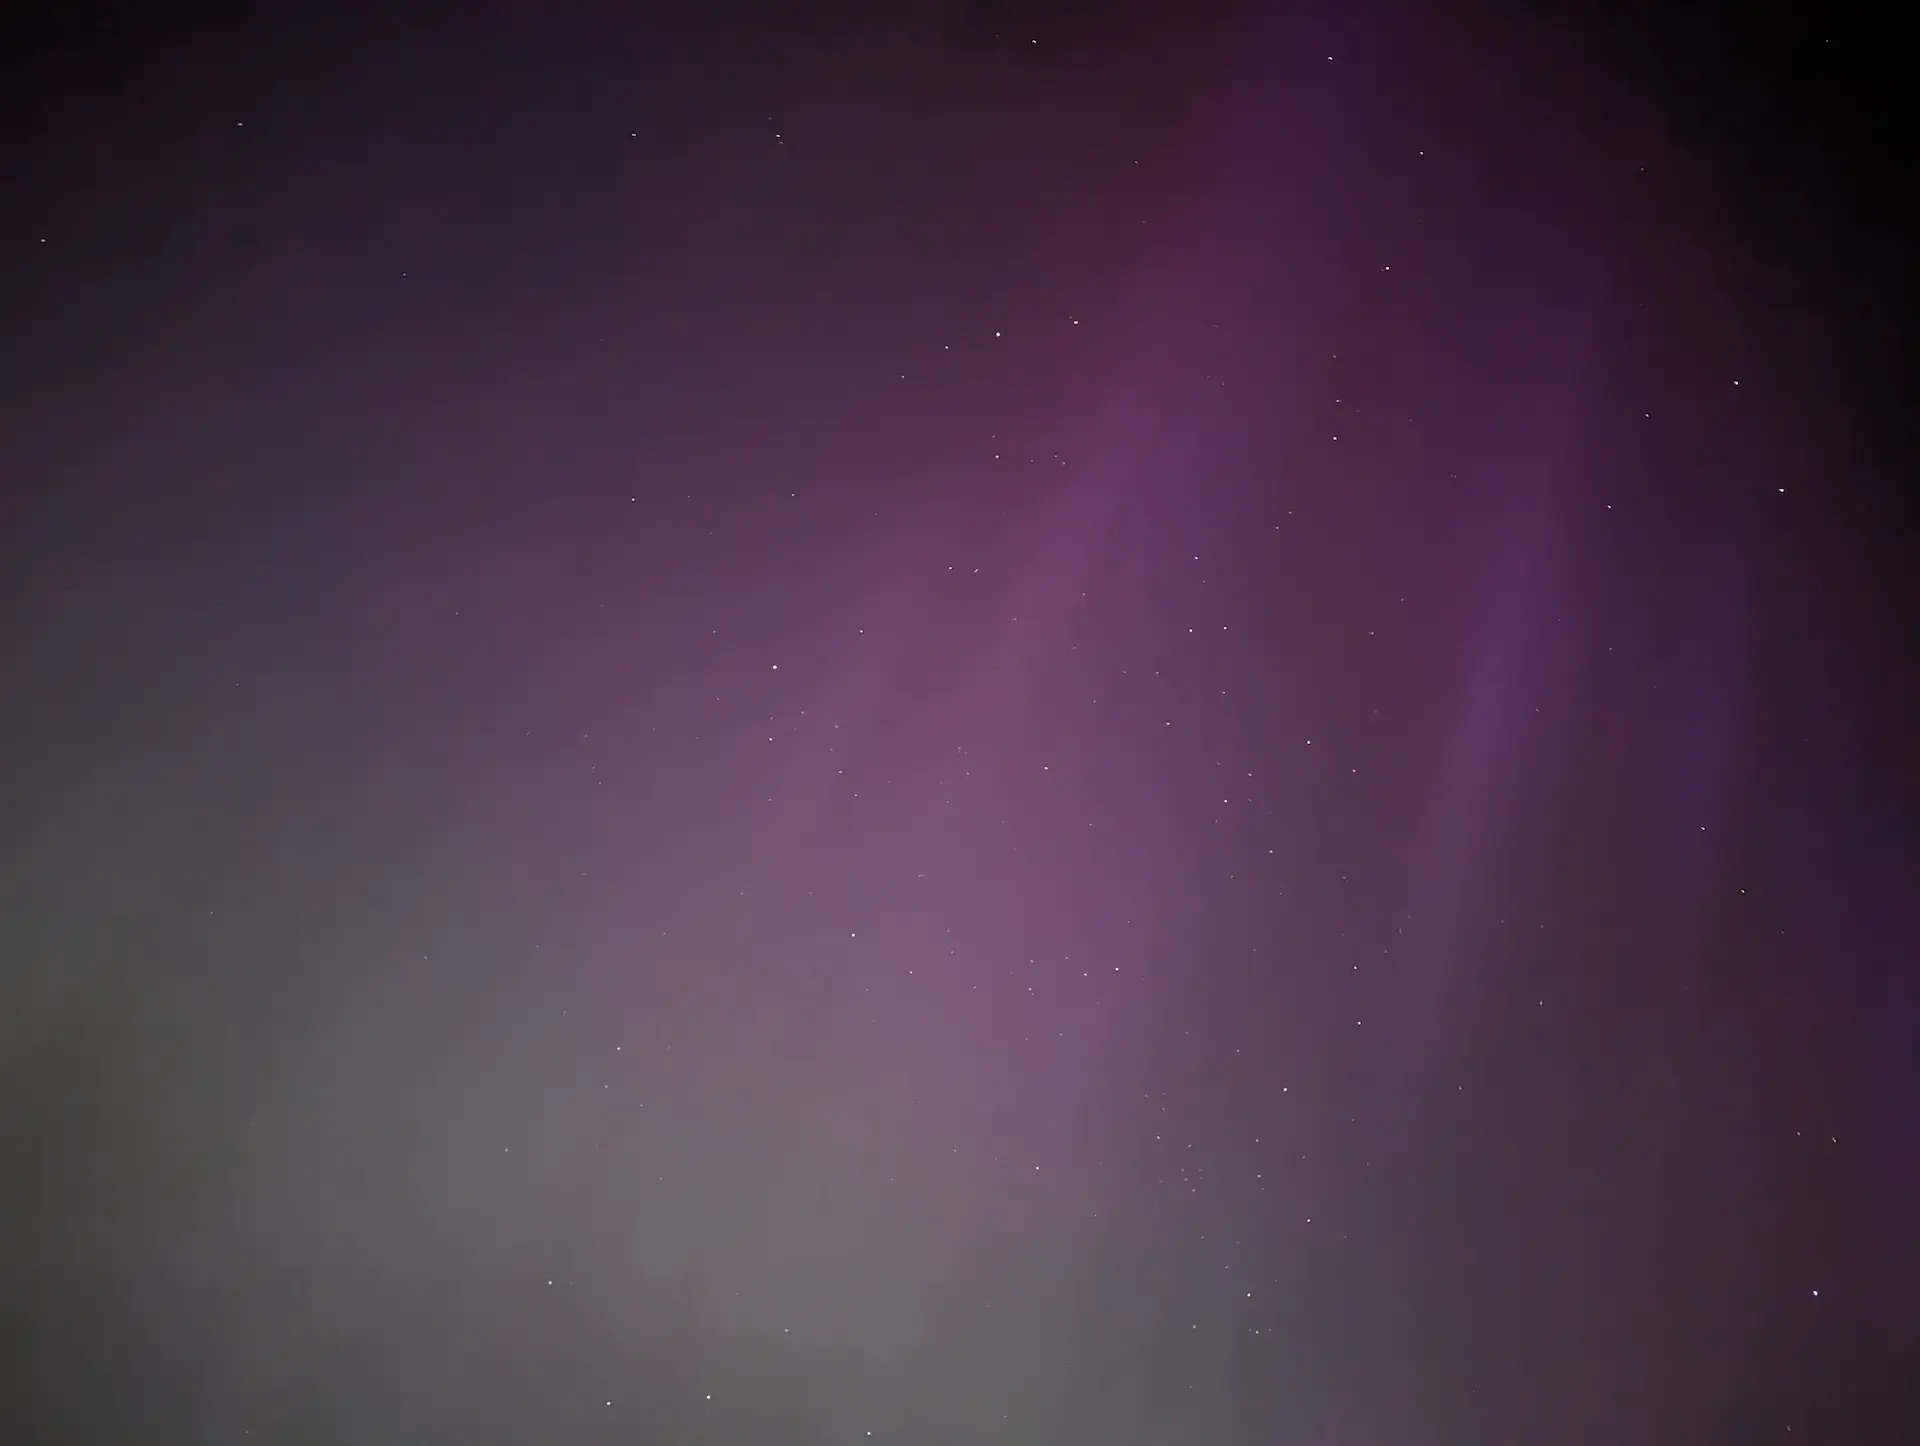 Faint green and purple Northern Light streaks in the night sky.